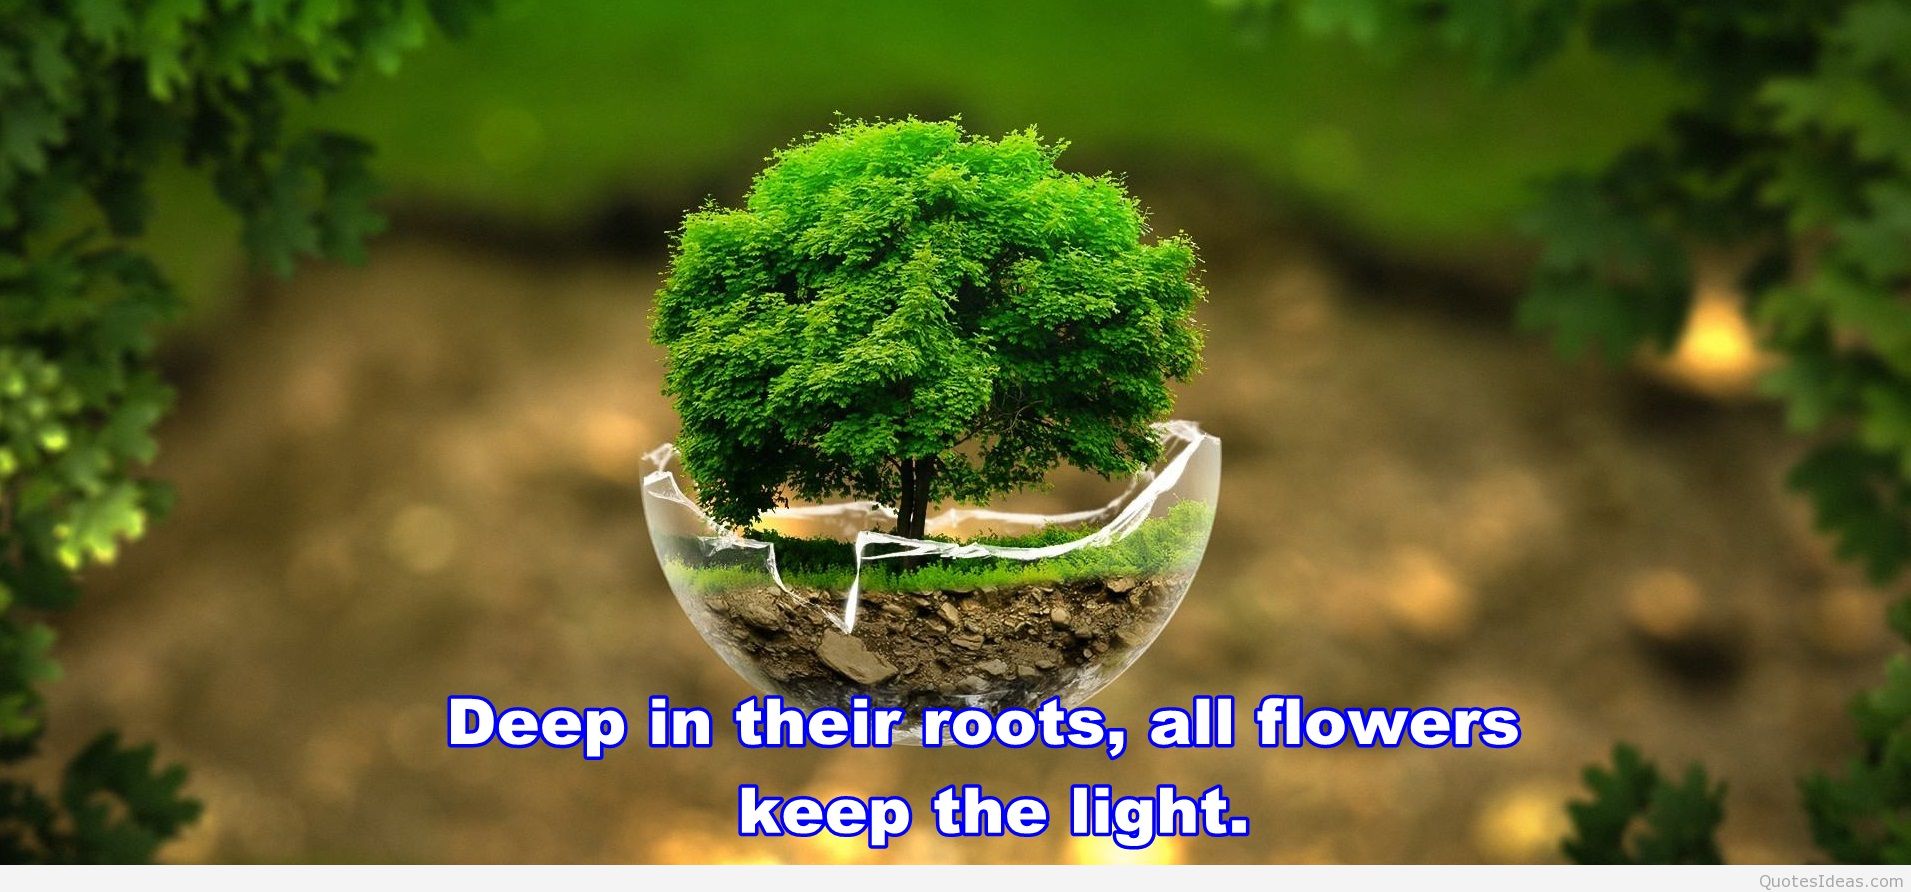 amazing wallpapers with quotes,nature,vegetation,natural landscape,tree,plant